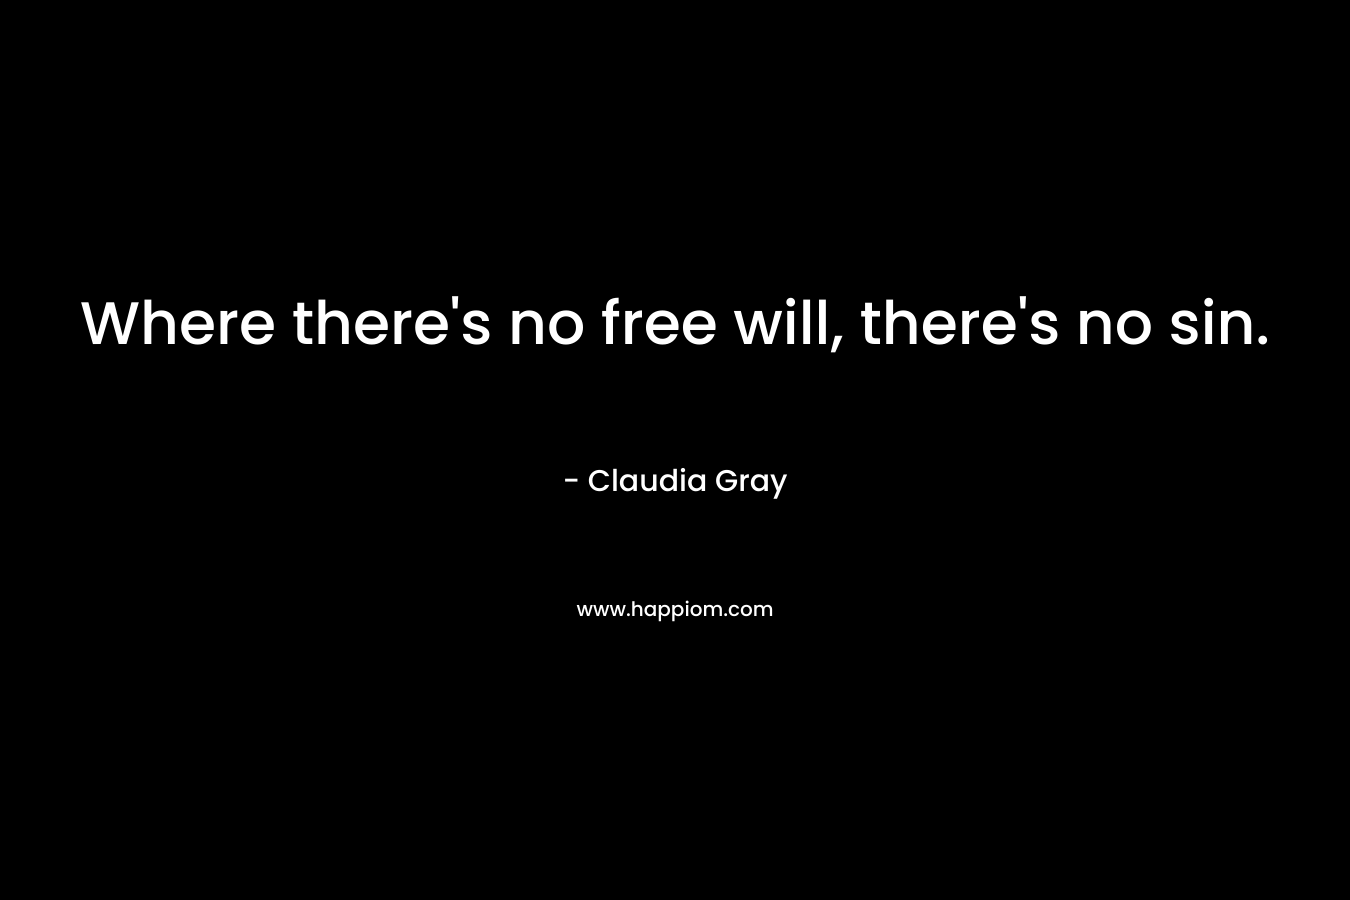 Where there’s no free will, there’s no sin. – Claudia Gray